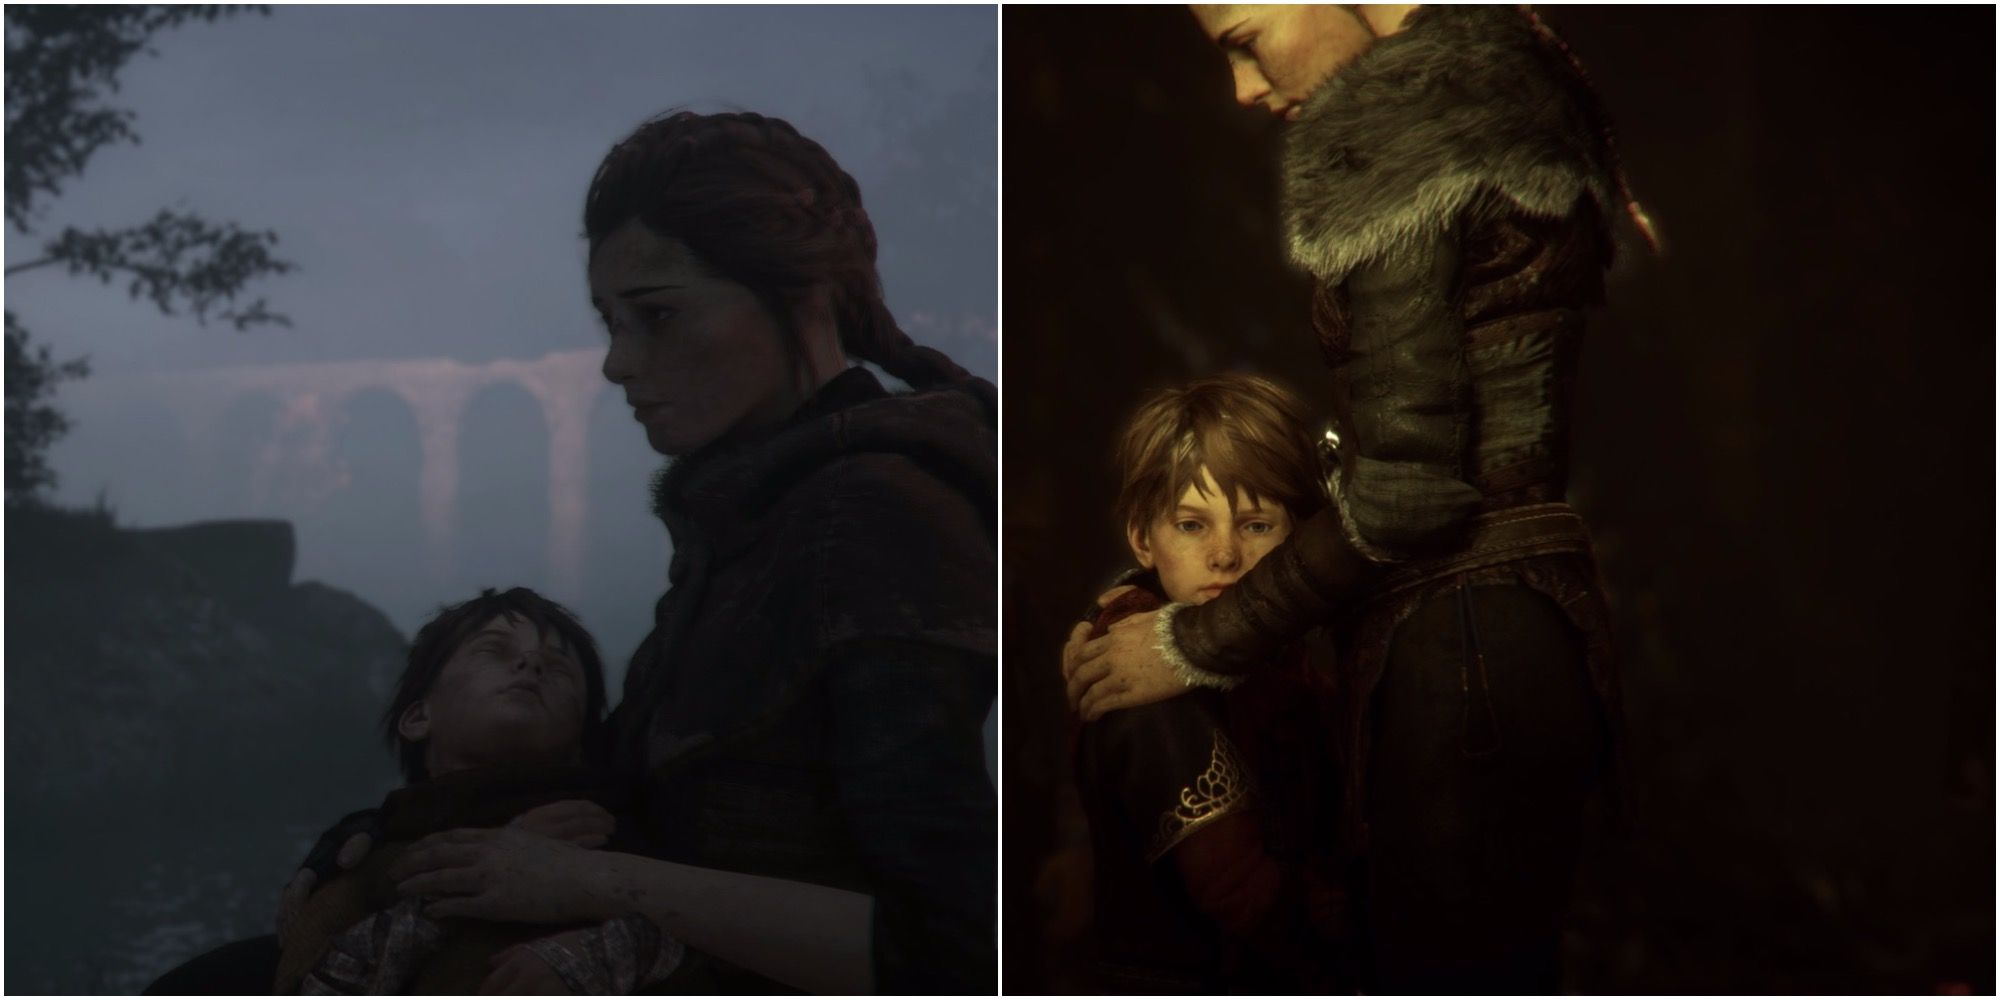 A plague tale 3? should they make another or stop with the